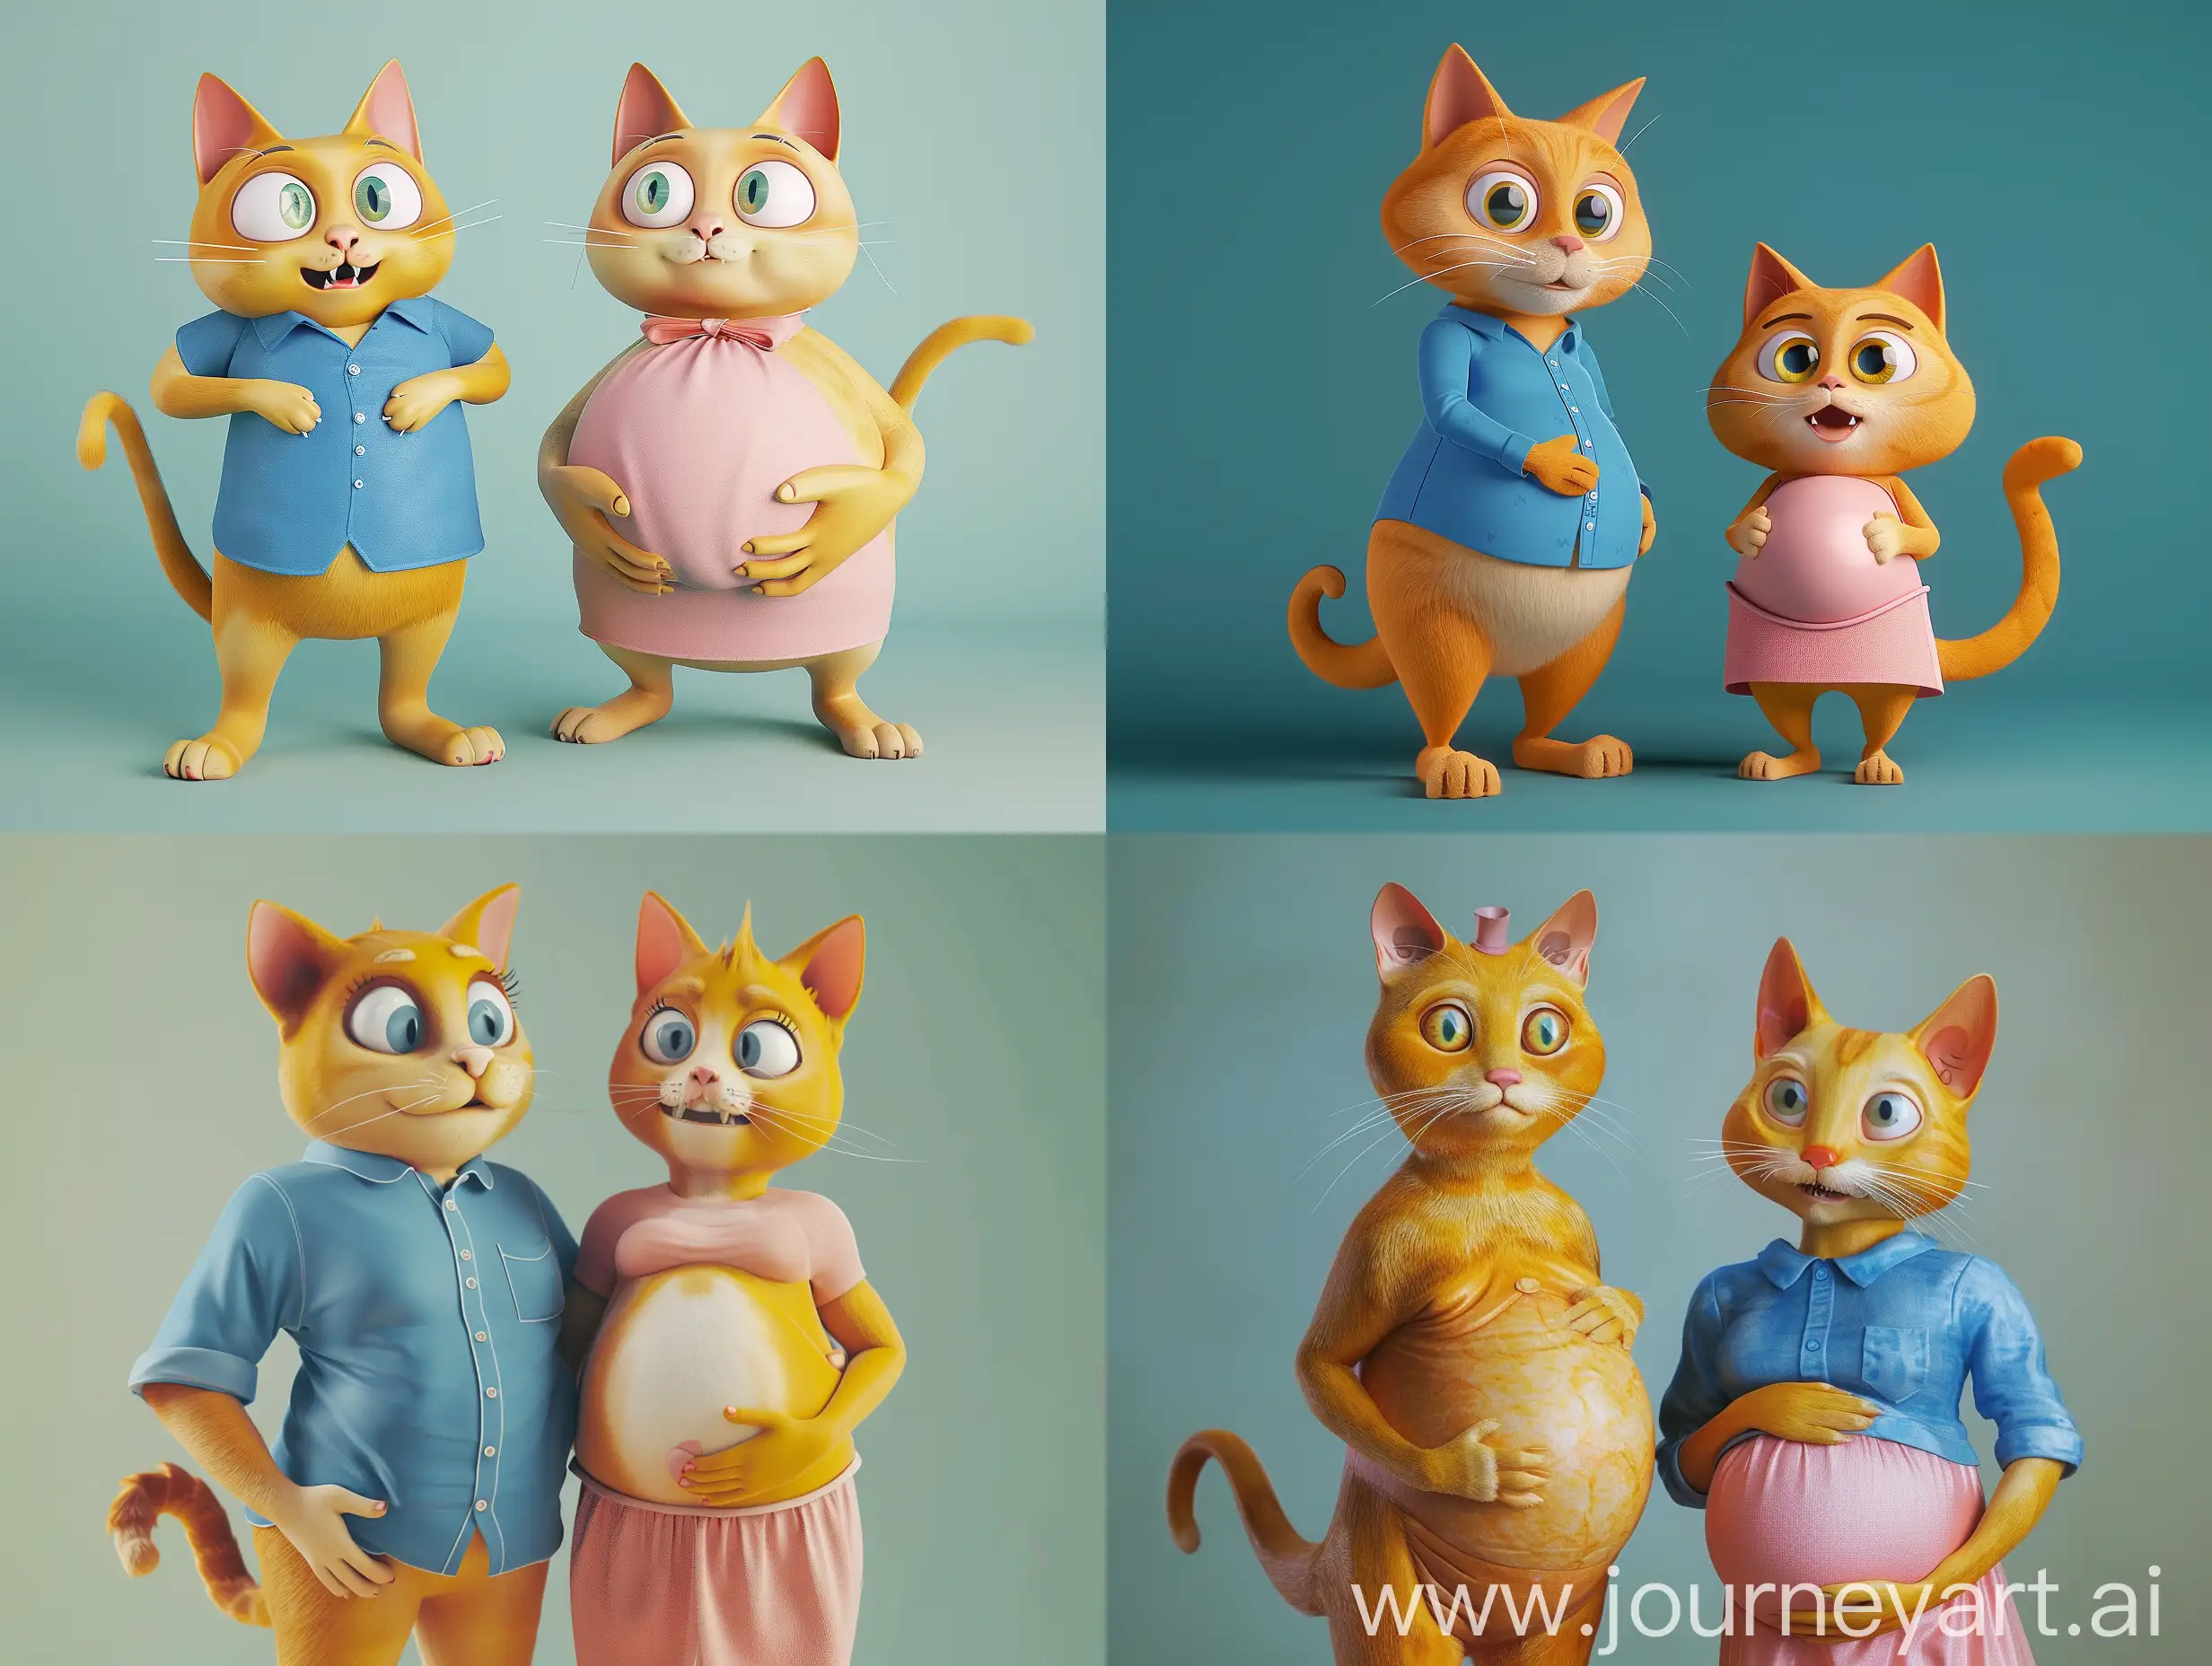 animated realistic scene of a youthful, vibrant yellow cat and its mate in their twenties, the cat with a slim body and bright large eyes wearing a blue shirt, and the cat mate in a charming feminine look wearing a pink skirt suitable for her swollen belly, both with expressive smiles reflecting their happiness with the new stage in their life, fashion, text 3D rendering, typography, illustration, painting, photo, poster, 3d render, solid color background